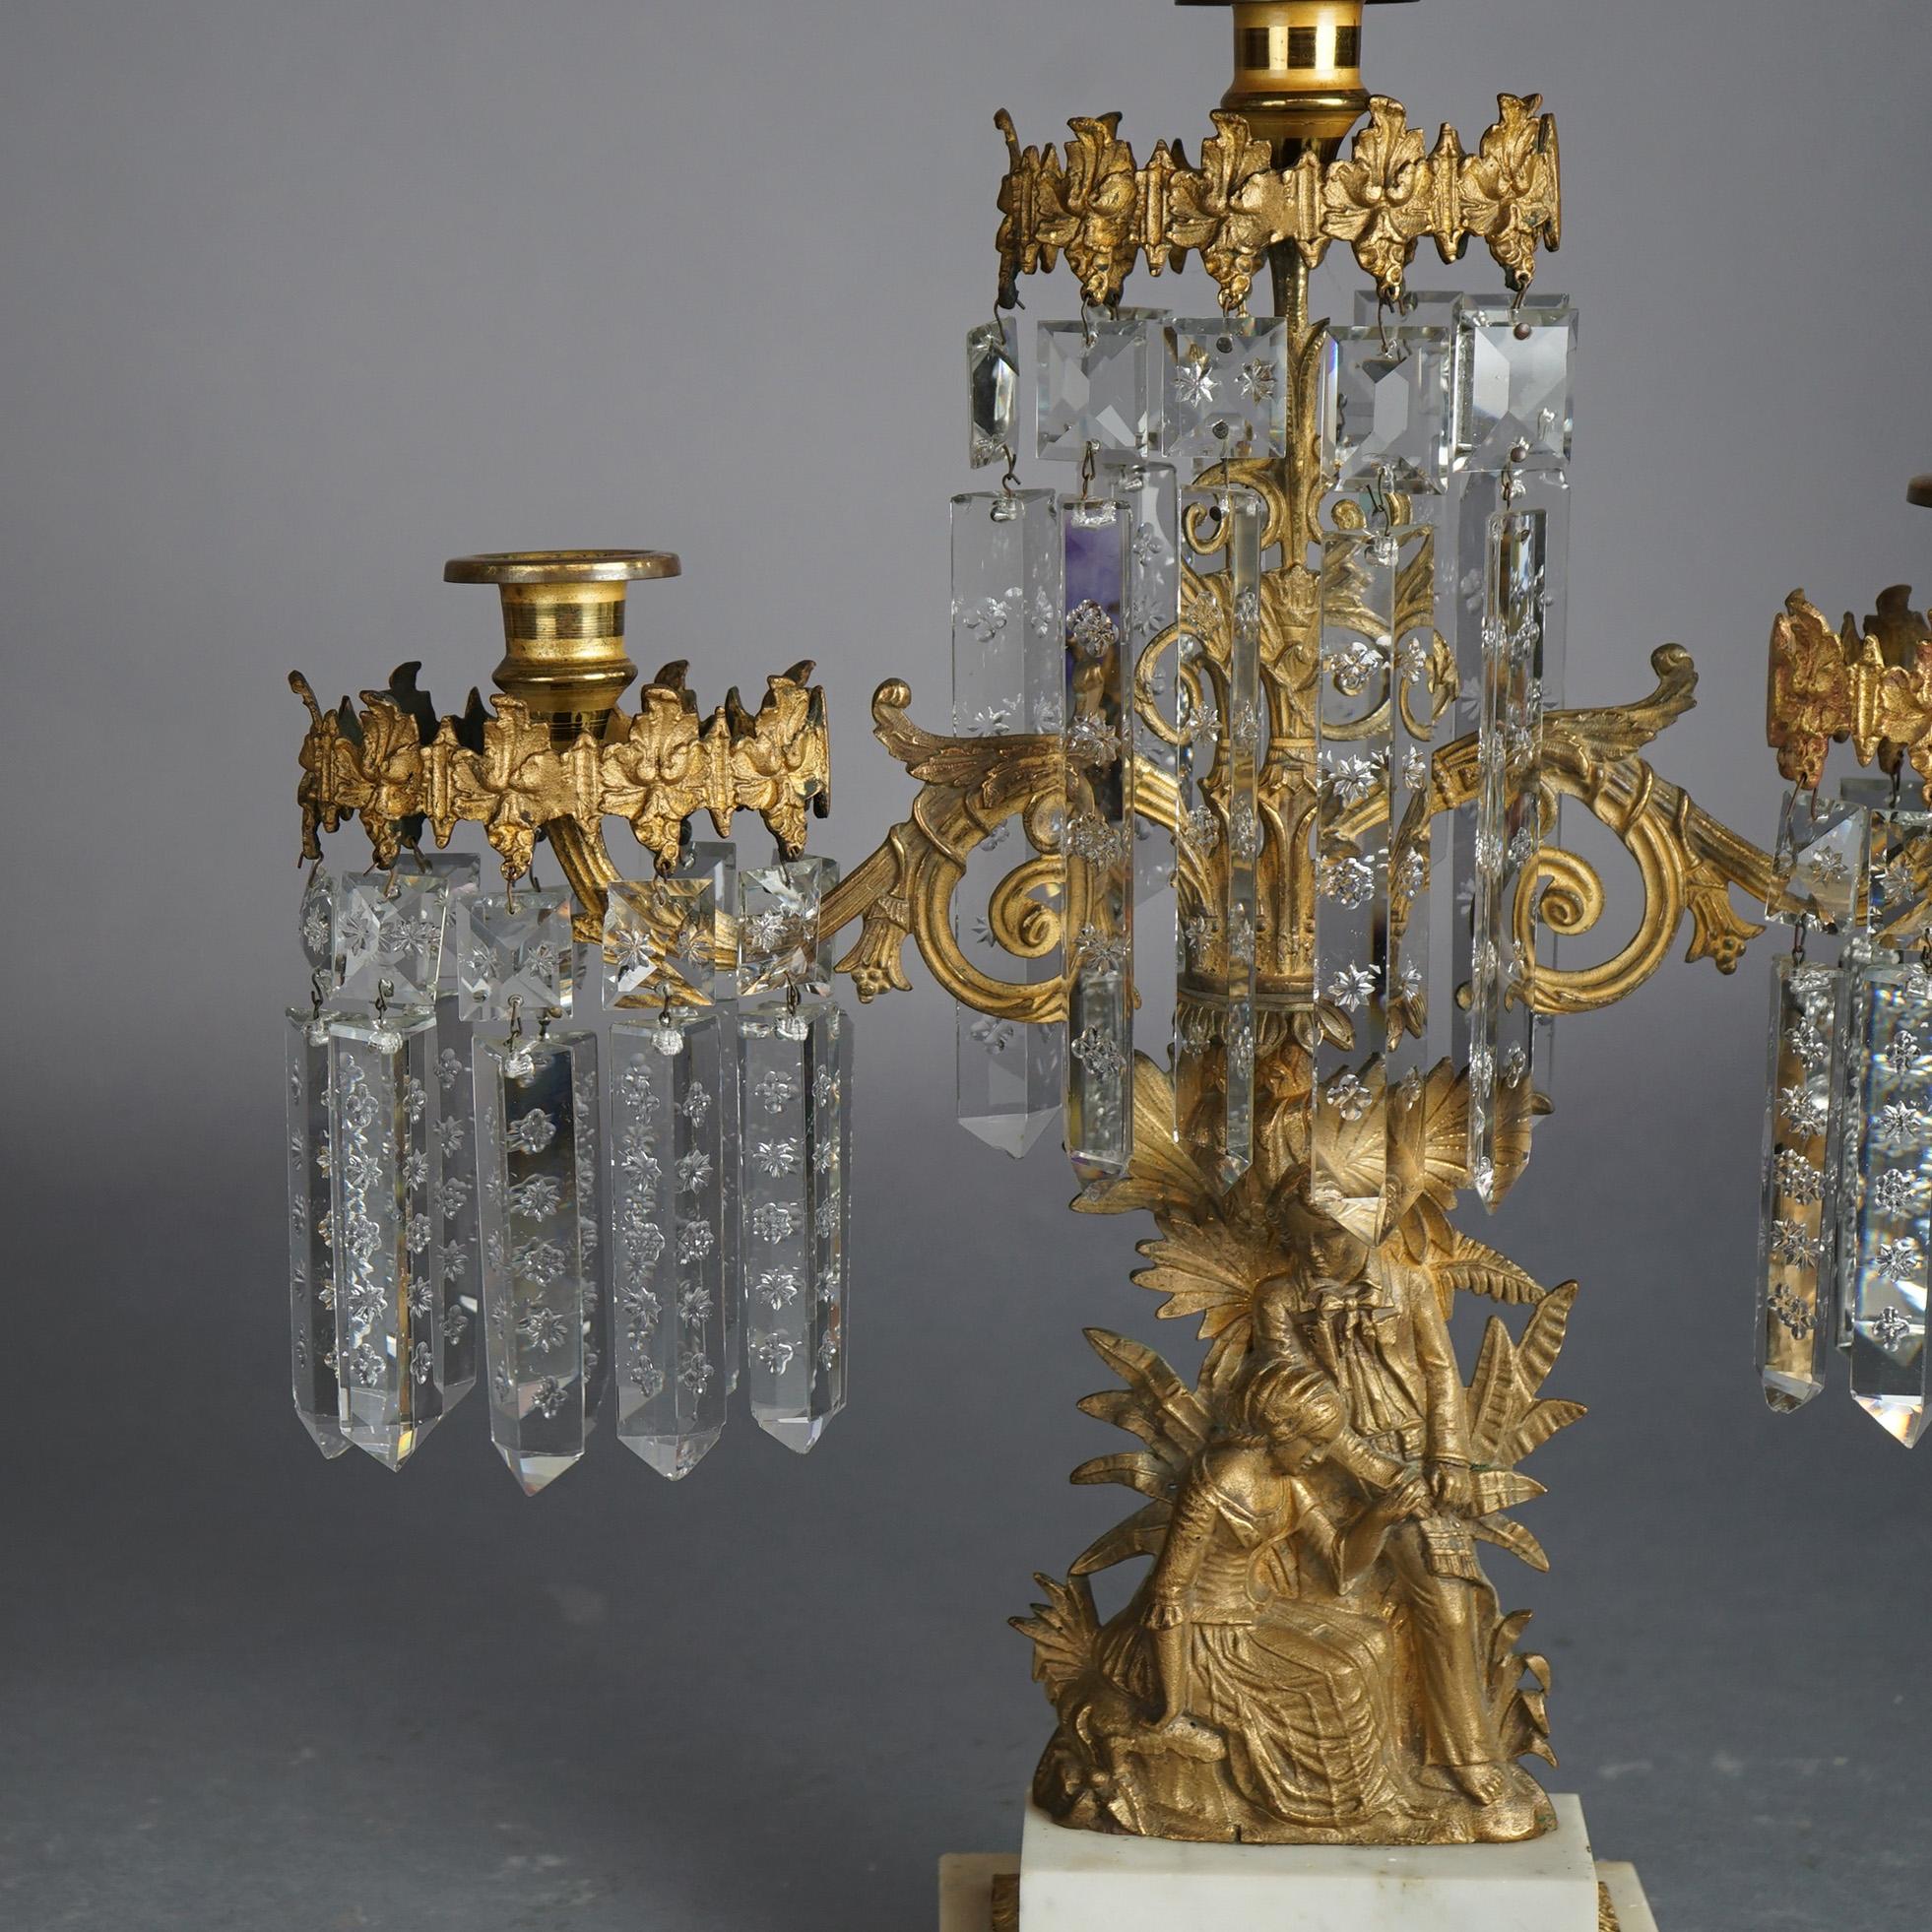 Antique Gilt Bronze American Girandole Candelabras with Marble & Crystals C1880 For Sale 9